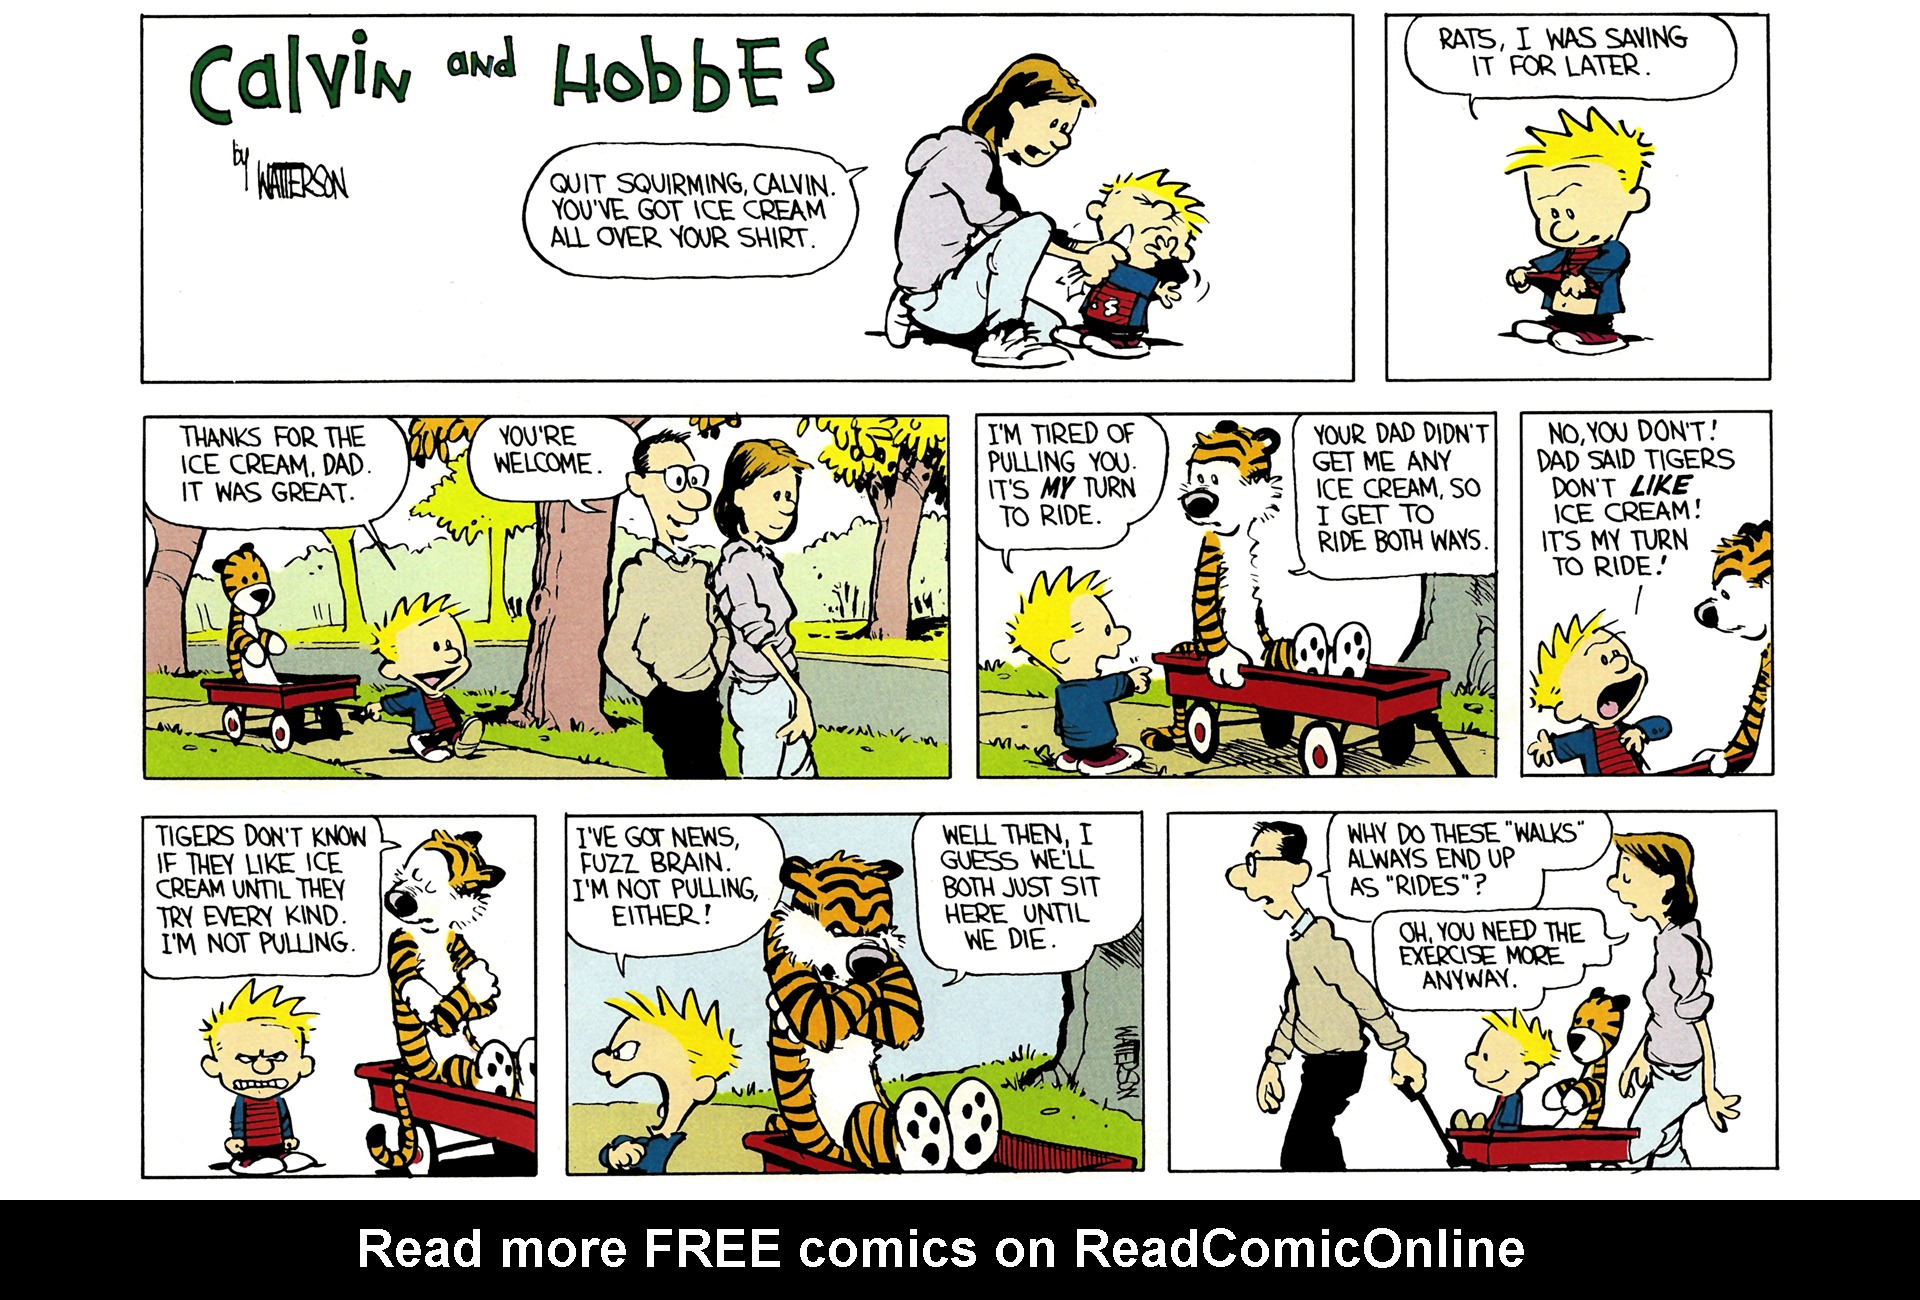 Calvin and Hobbes Issue 2 | Viewcomic reading comics online ...